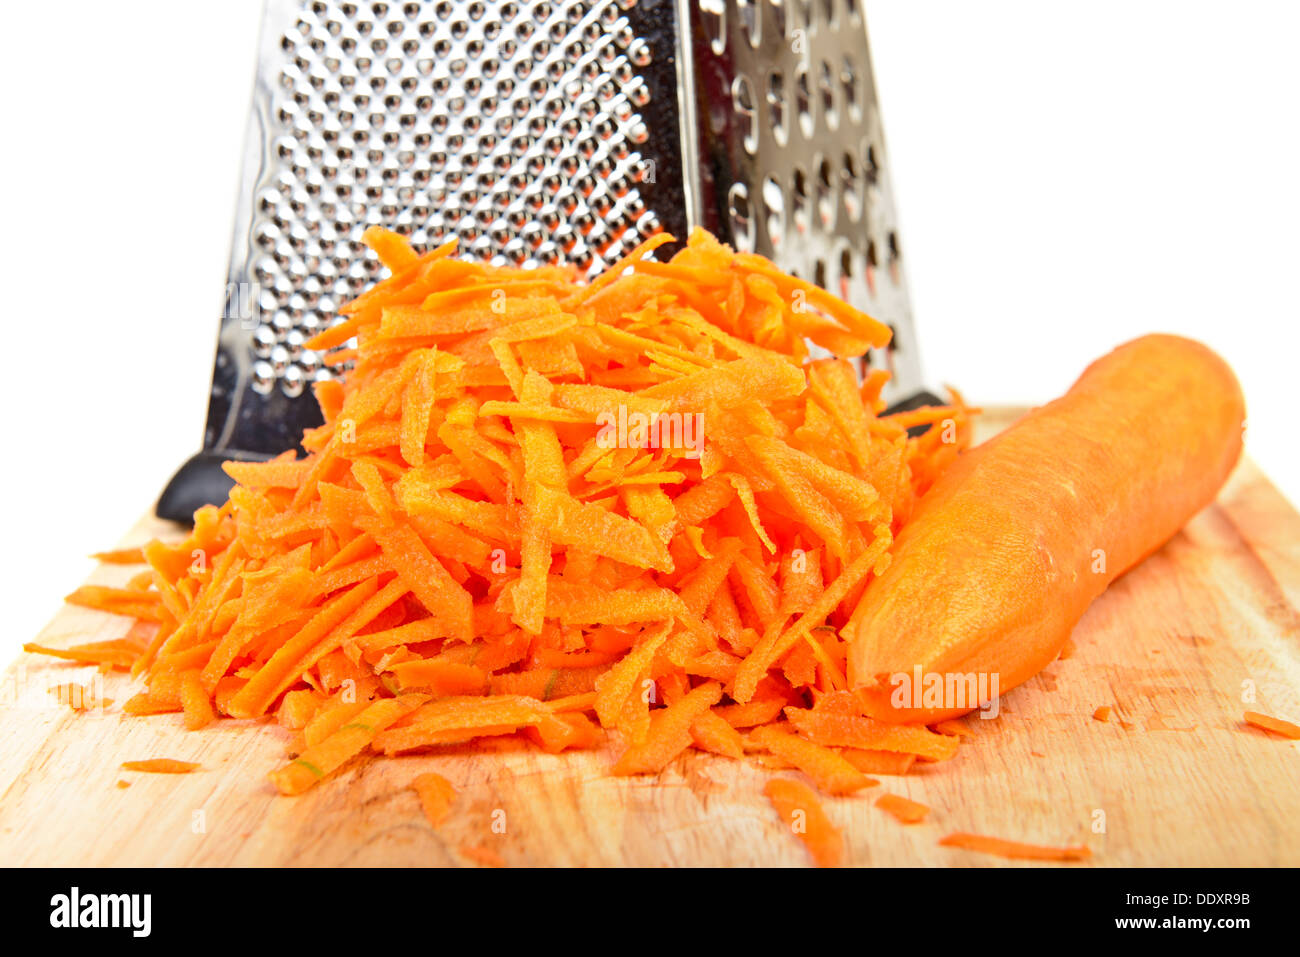 Shredded and whole carrot with metal grater on cutting board Stock Photo